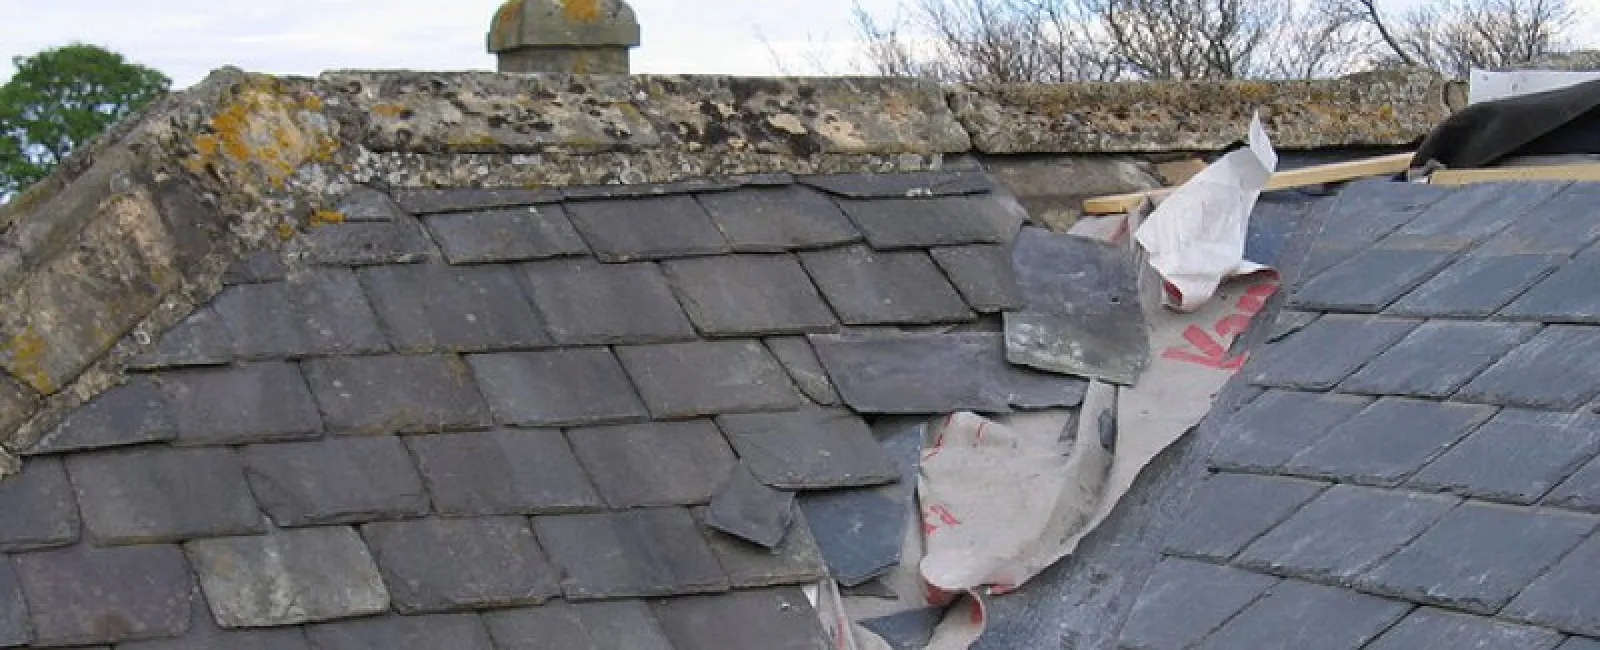 5 Ways To Prepare Your Home For A Re-Roofing